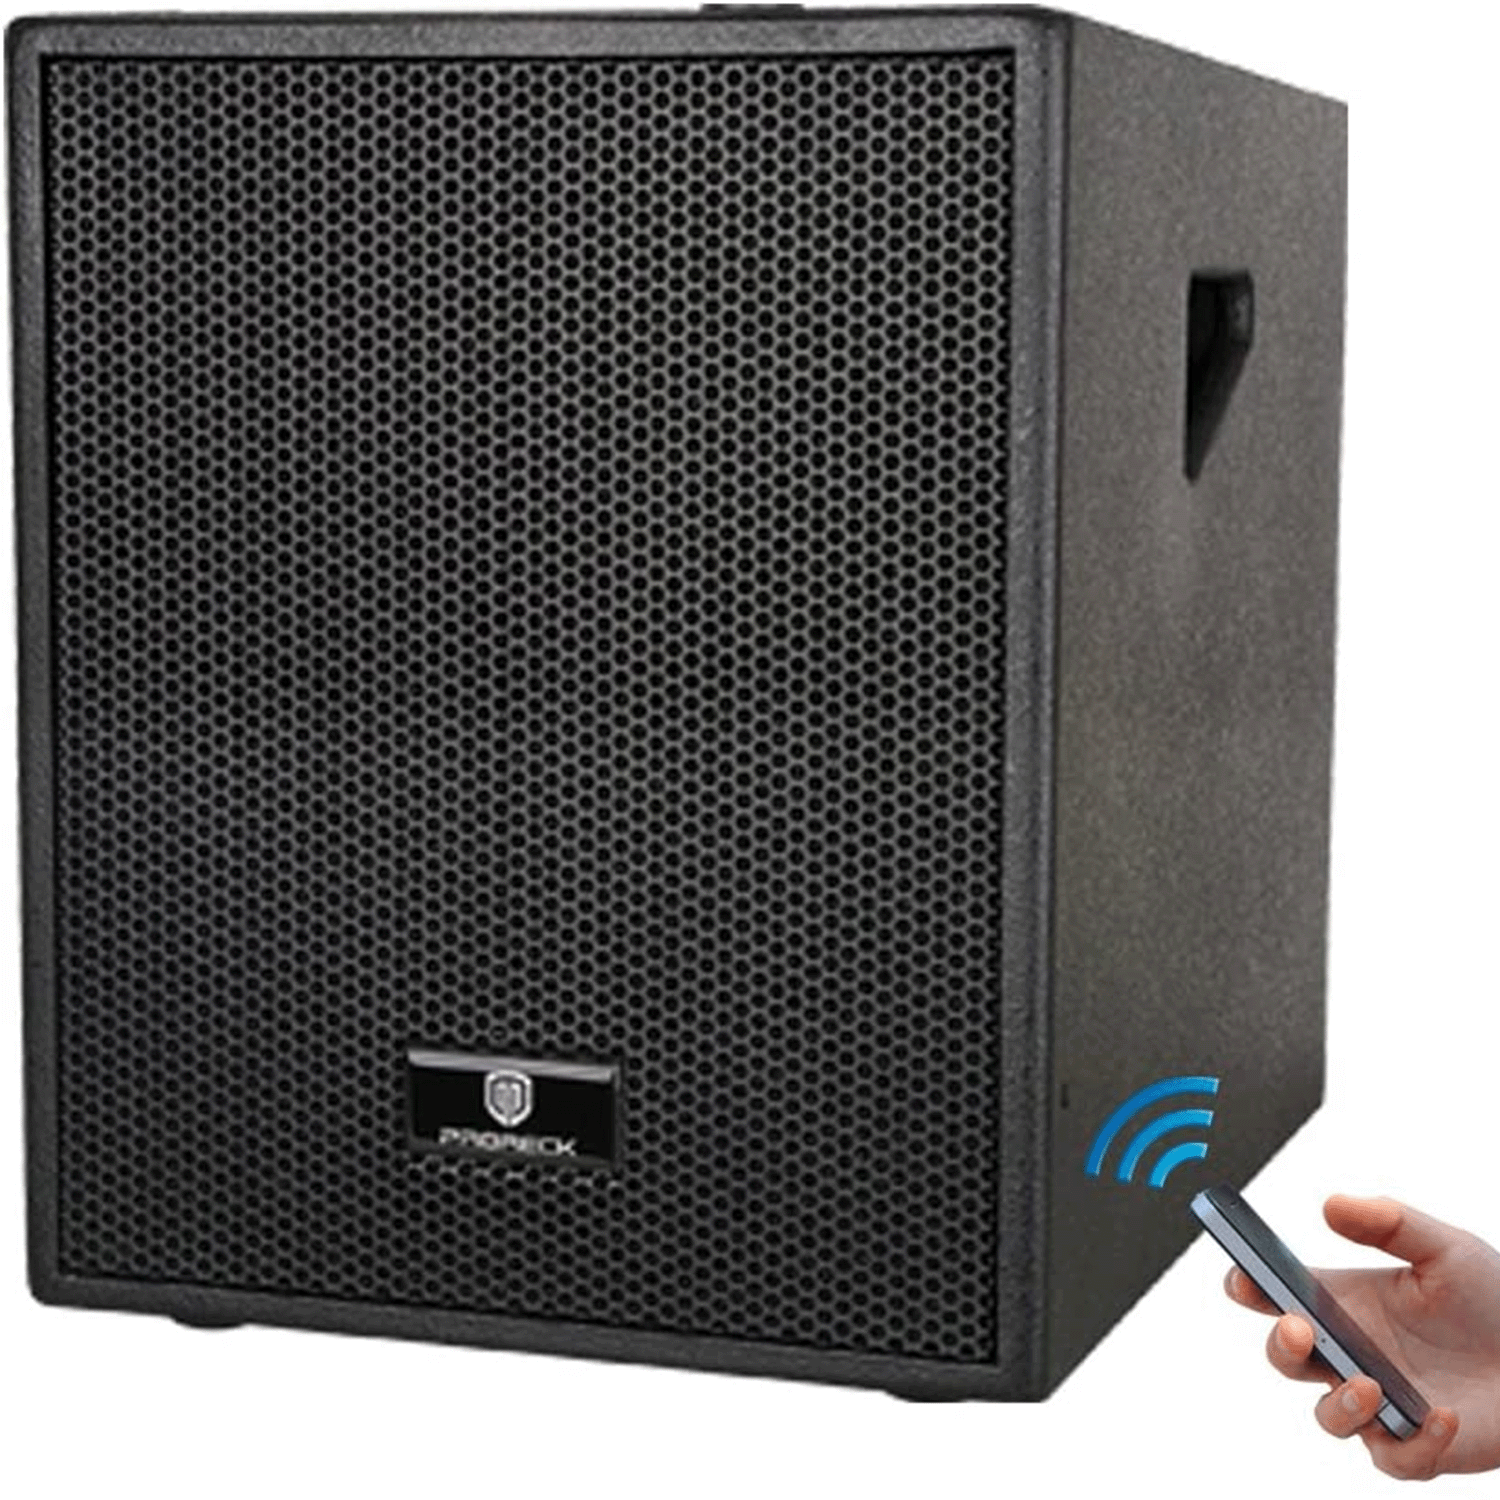 PRORECK Club 3000B | 12-Inch 4-Channel|Powered Subwoofer 12INCH SUBWOOFER POWERED